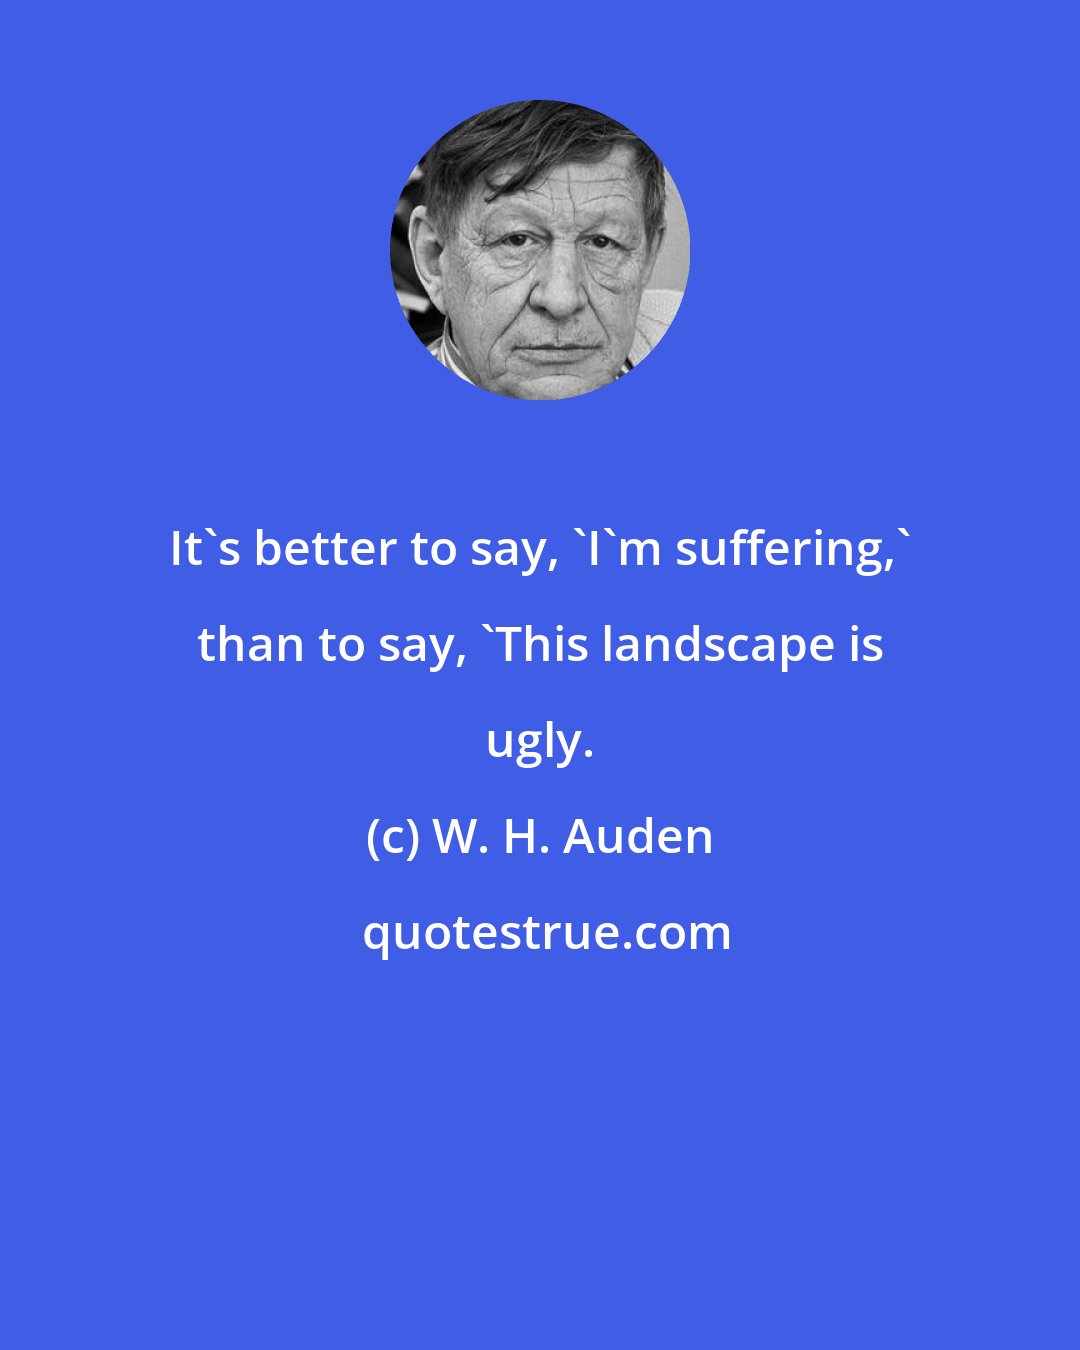 W. H. Auden: It's better to say, 'I'm suffering,' than to say, 'This landscape is ugly.